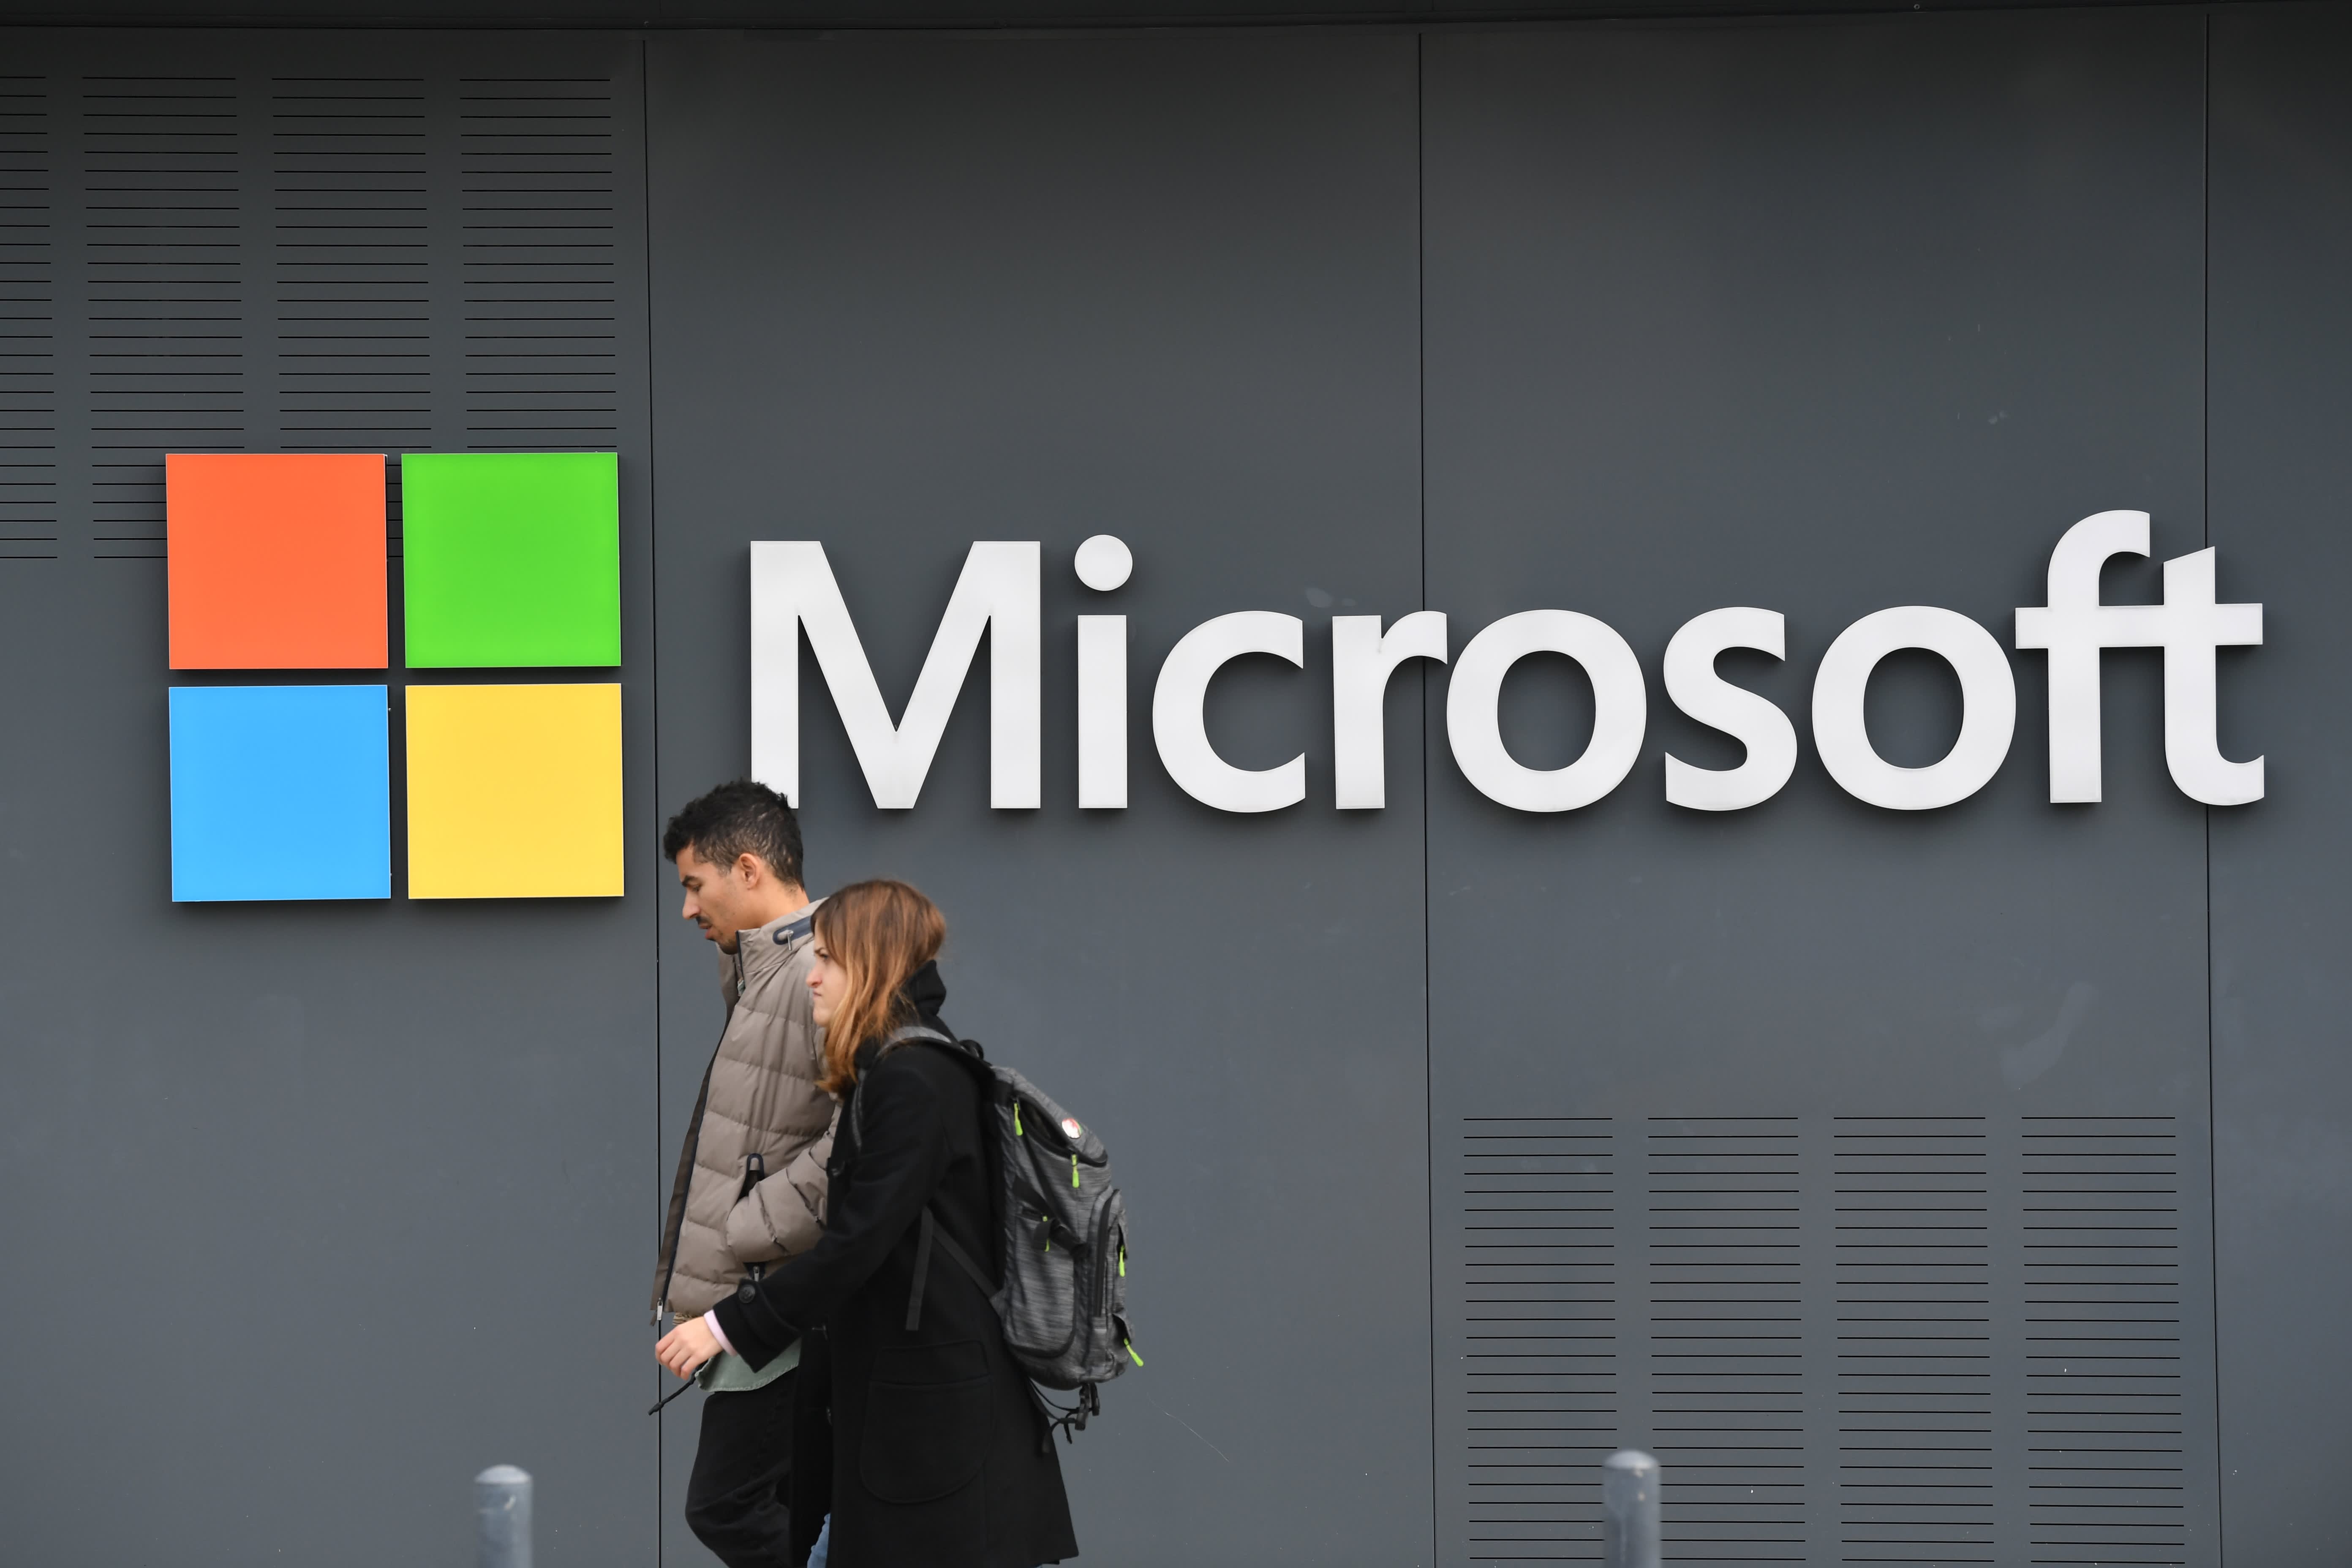 Microsoft Alleged Chinese-Backed Hackers Attacked Us Infrastructure